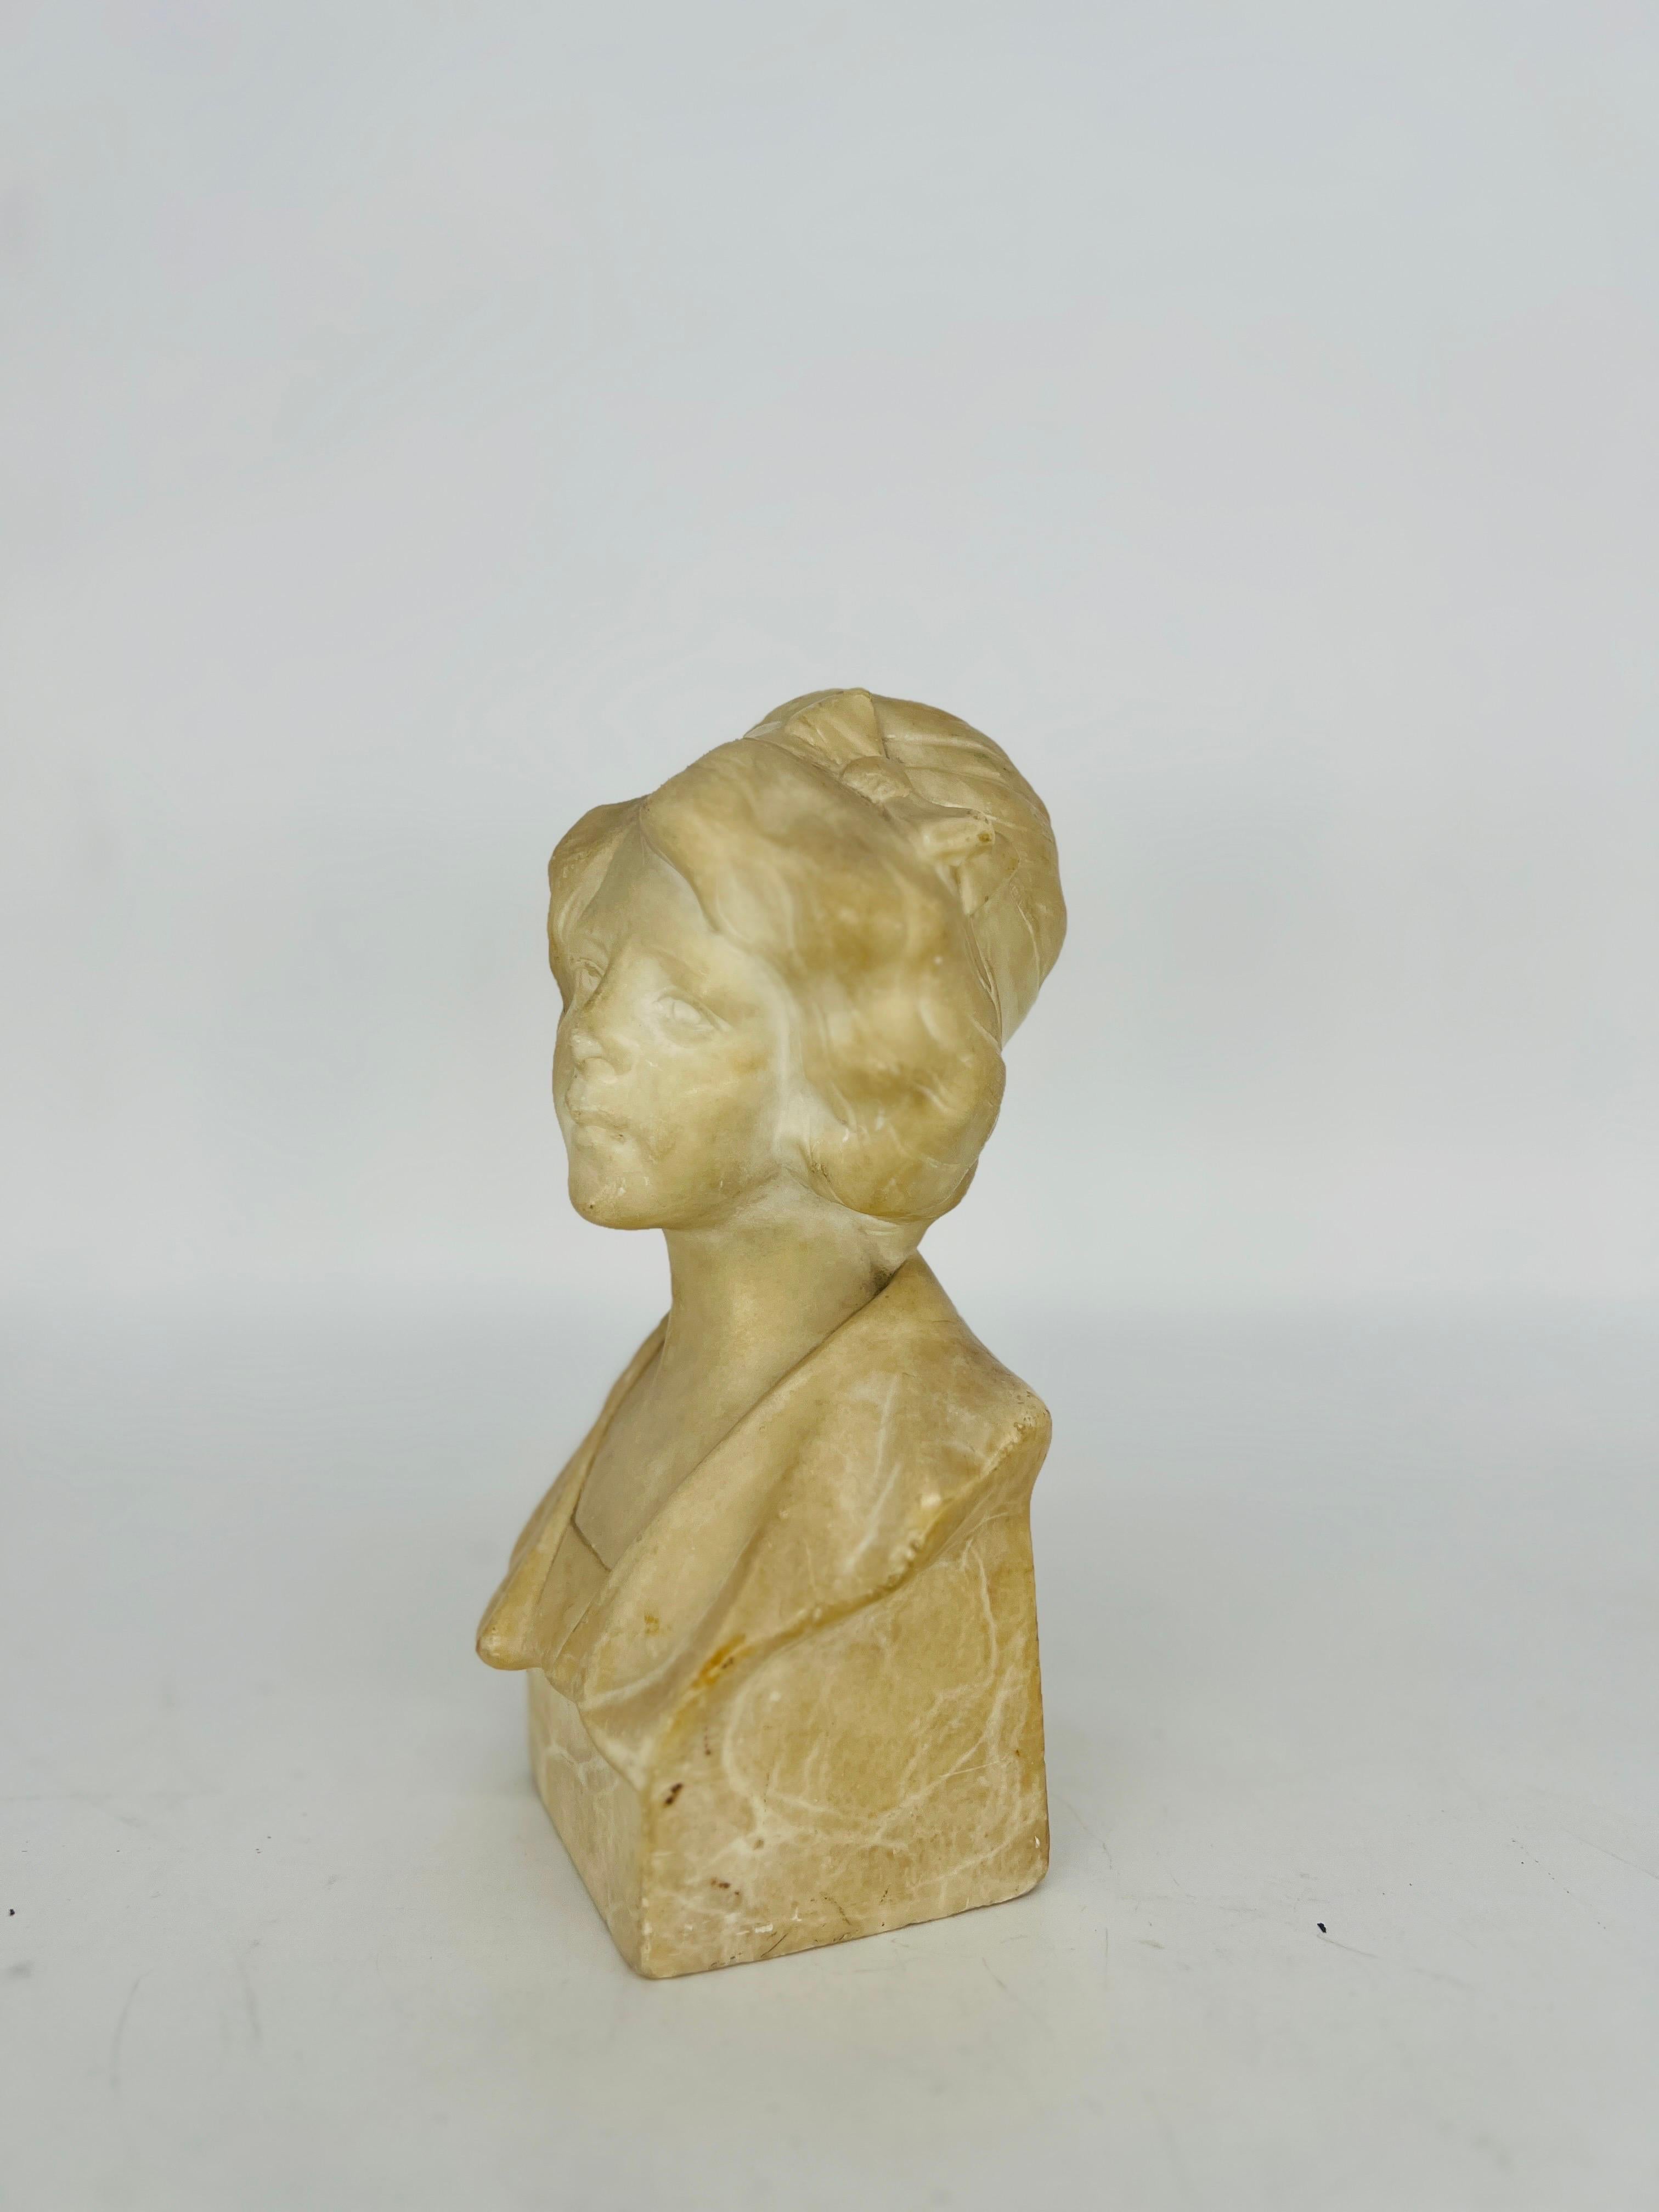 Likely French, 19th century.

An antique Art Nouveau era carved marble bust of a young lady. The marble presents very well and shows the true craftsmanship of the era. Signed to the verso 